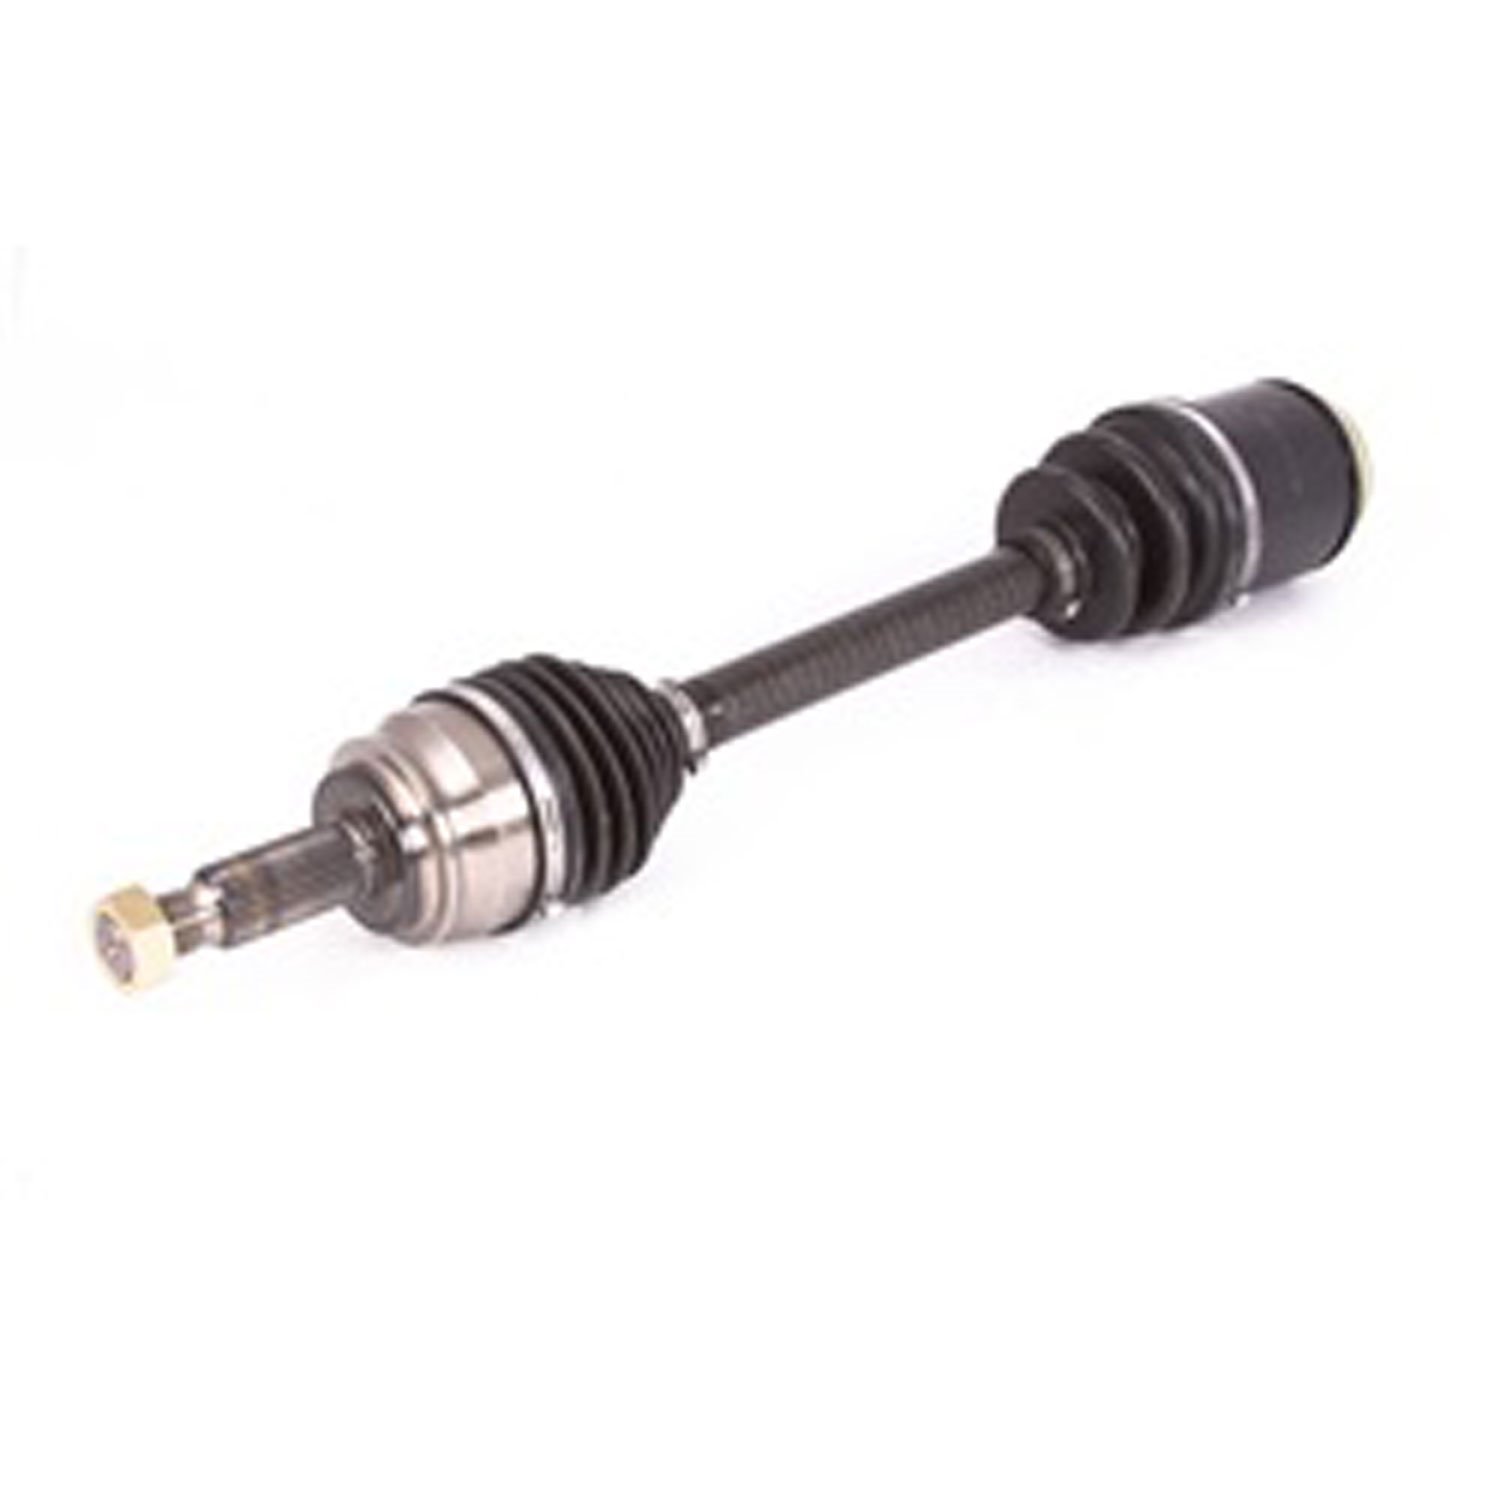 This front outer axle shaft for Dana 30 from Omix-ADA fits the left or right sides of 91-06 Jeep Wra